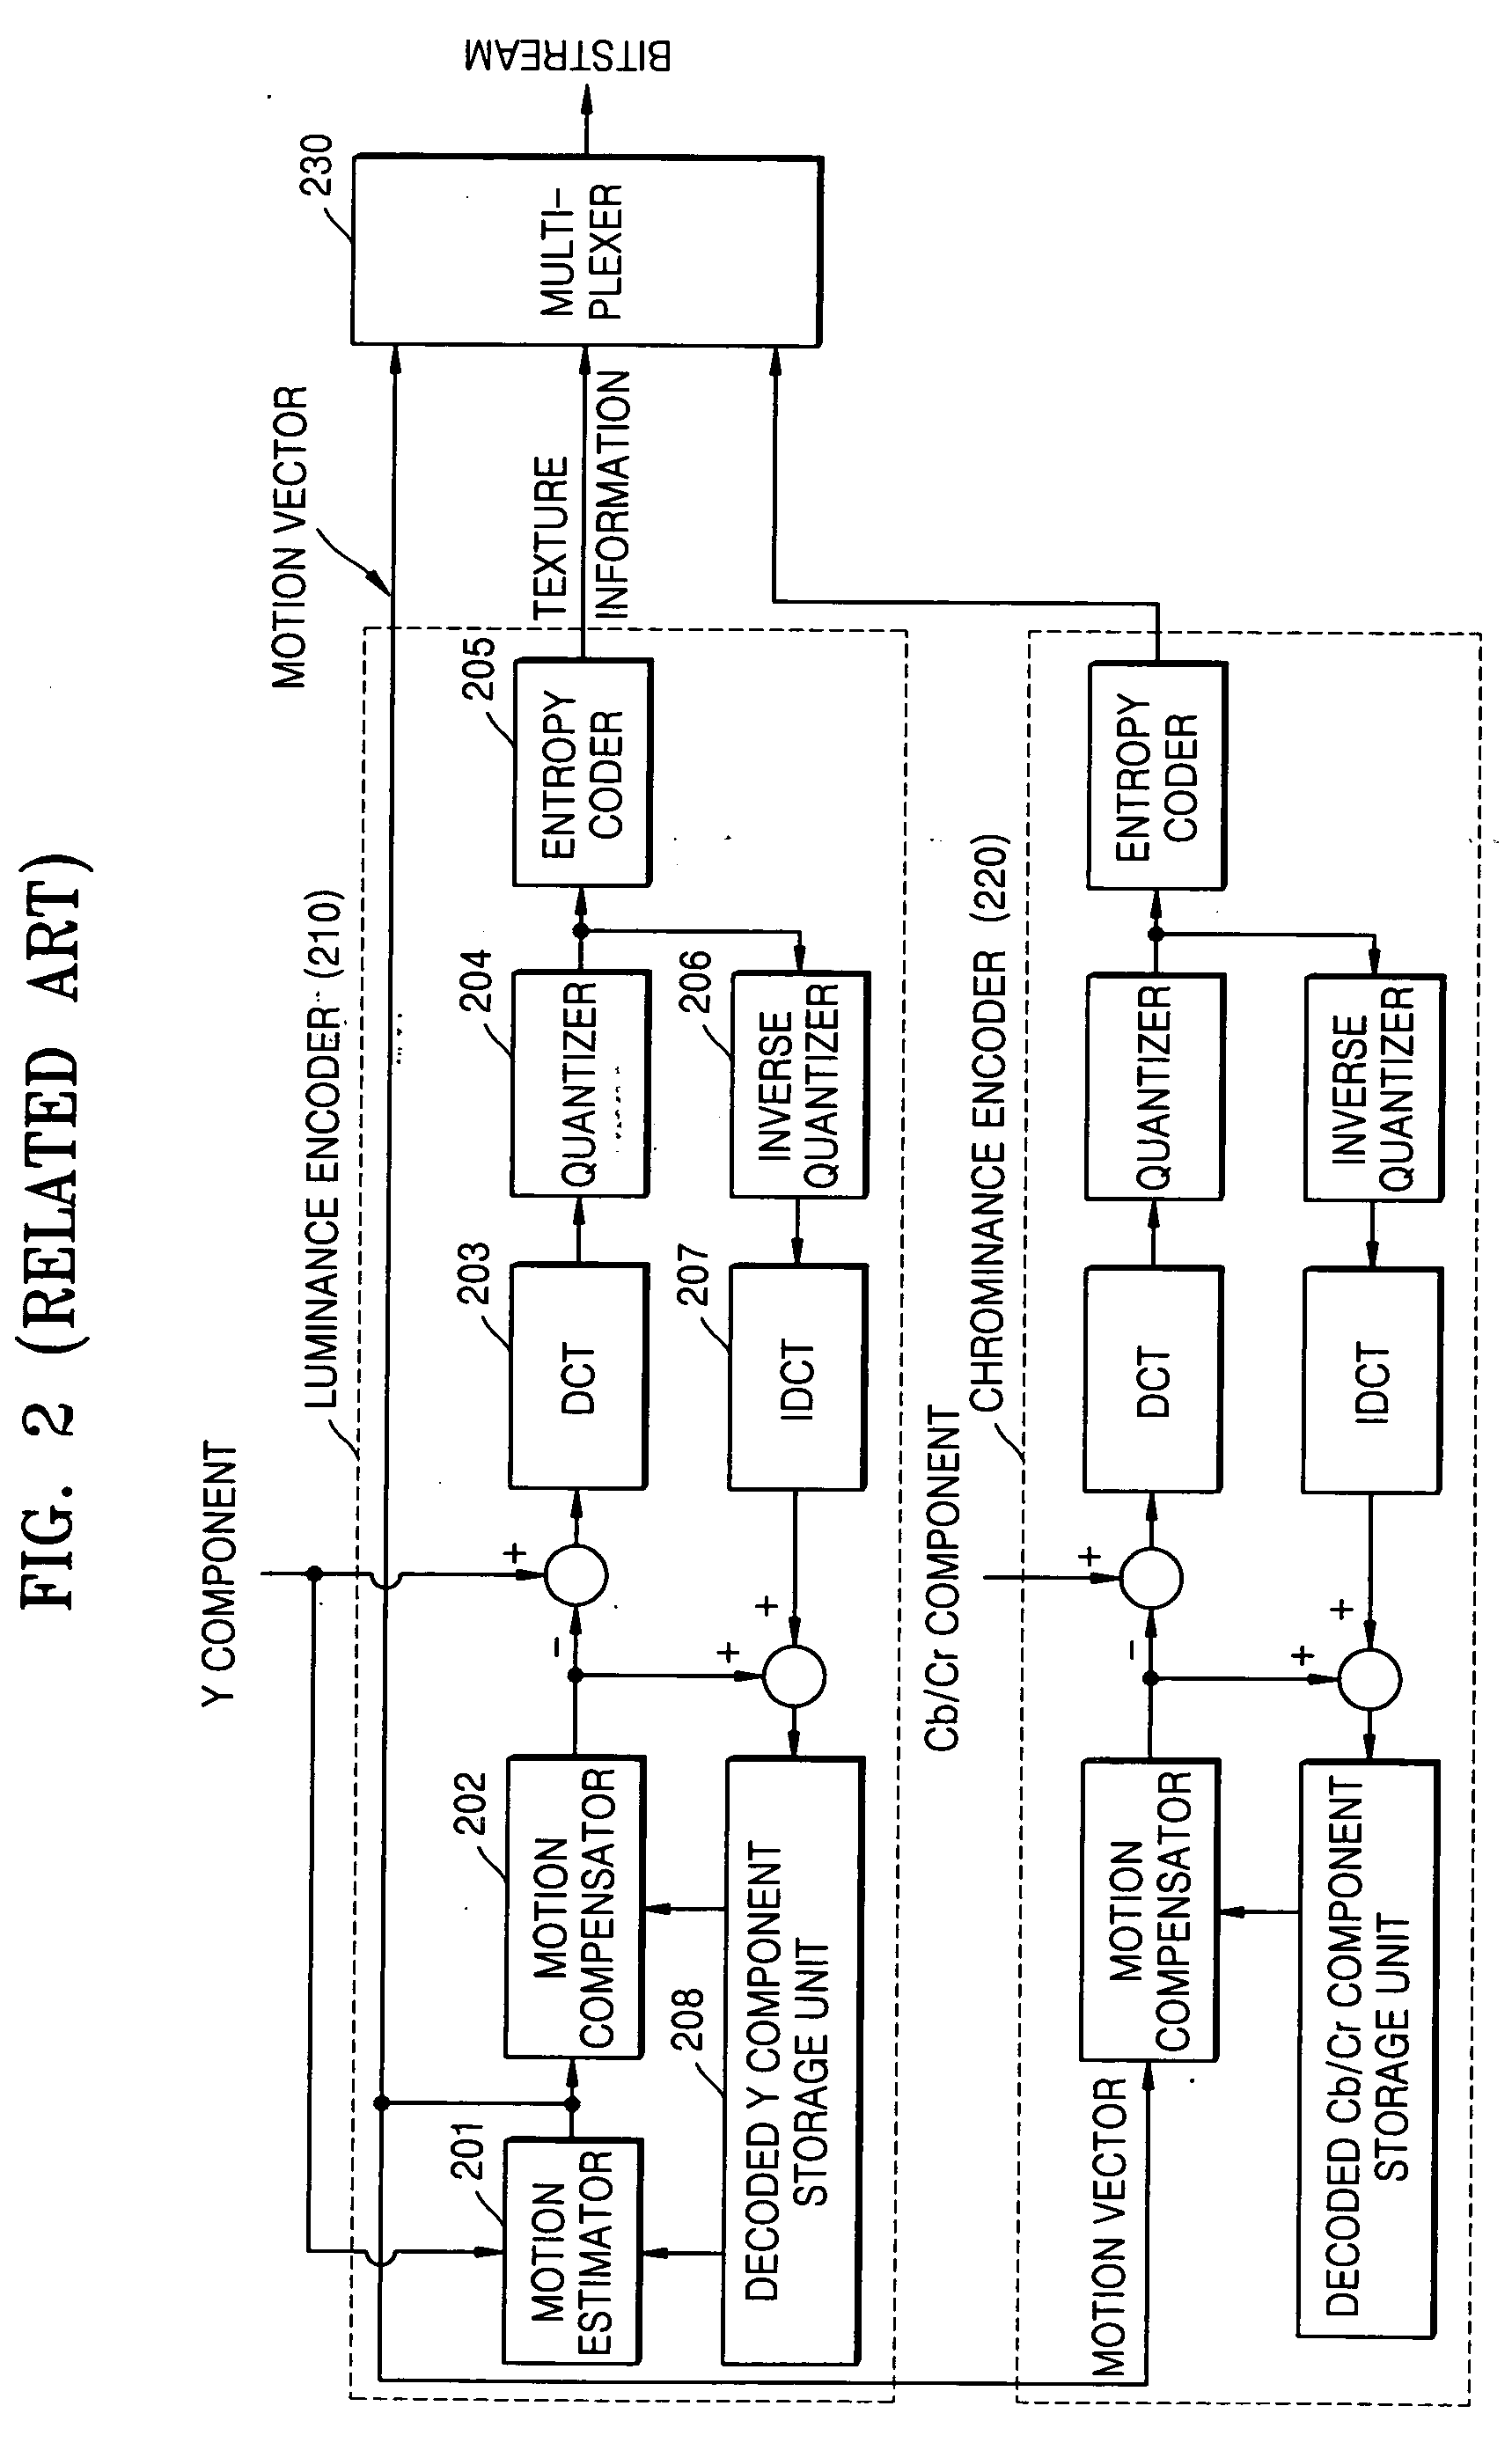 Method and apparatus for scalably encoding and decoding color video